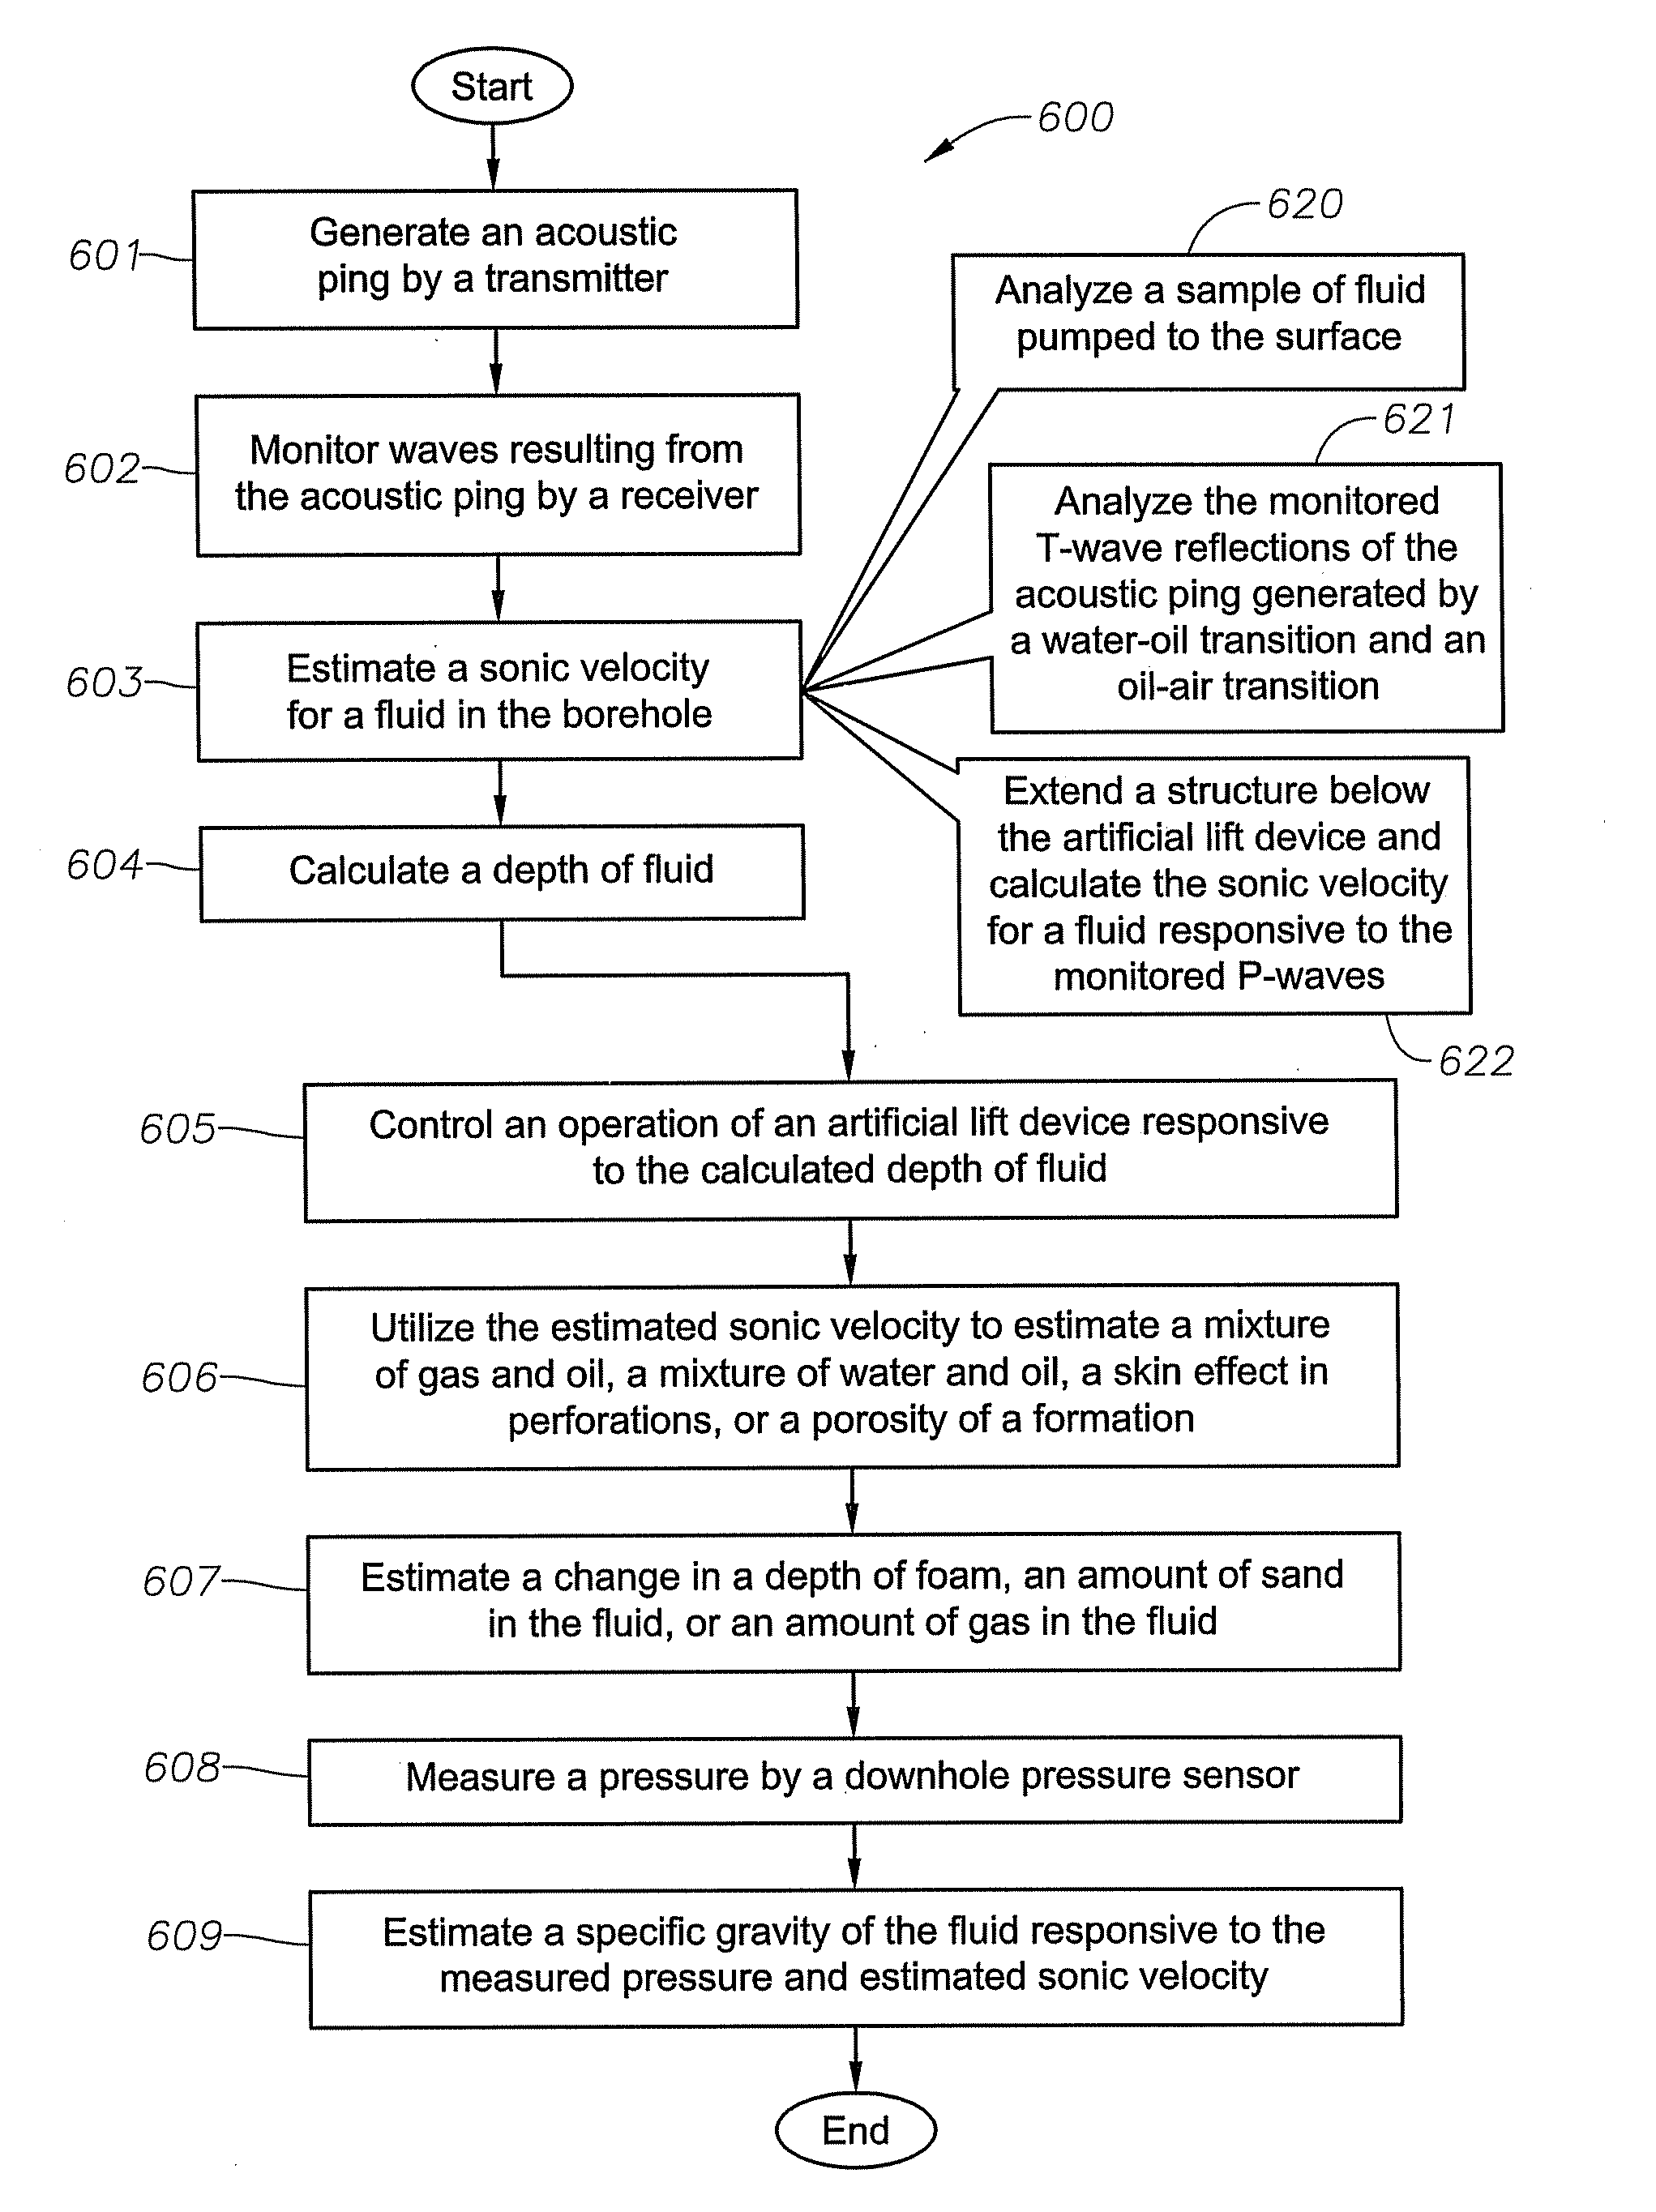 Using An Acoustic Ping and Sonic Velocity to Control an Artificial Lift Device